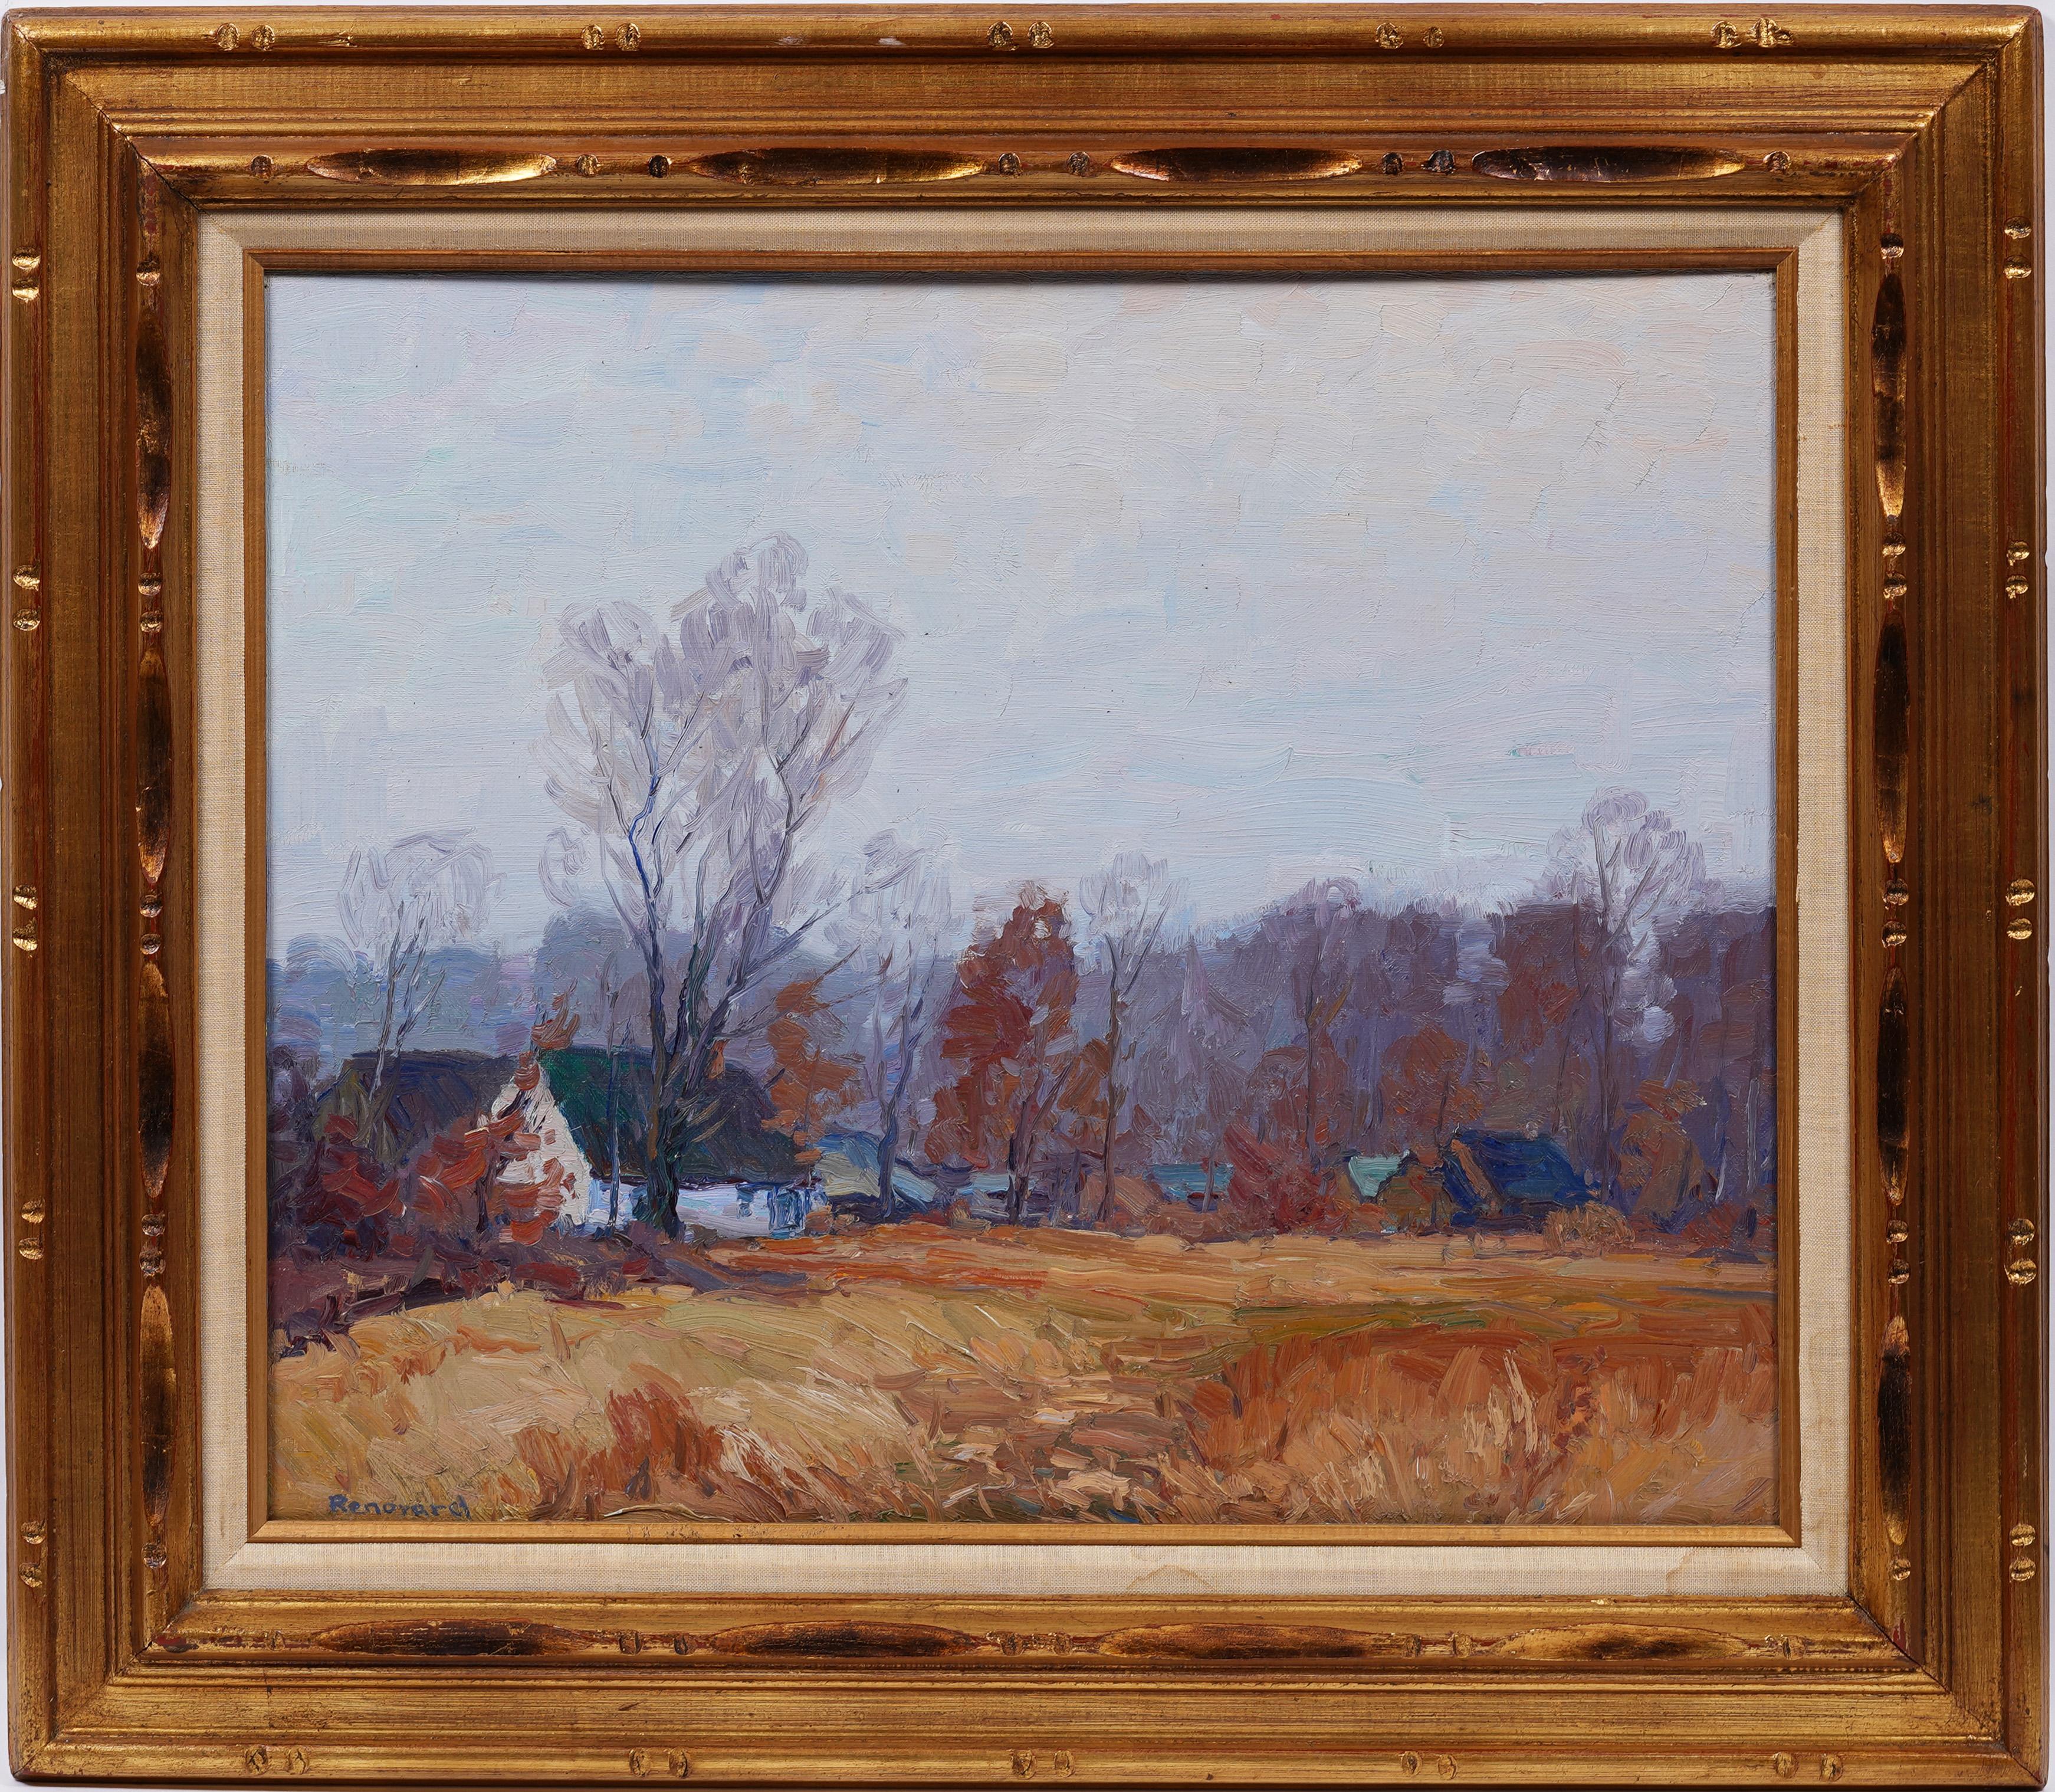 Antique American impressionist oil painting of a fall landscape by George A. Renouard (American, 1884-1954).  Oil on board.  Signed.  Framed.